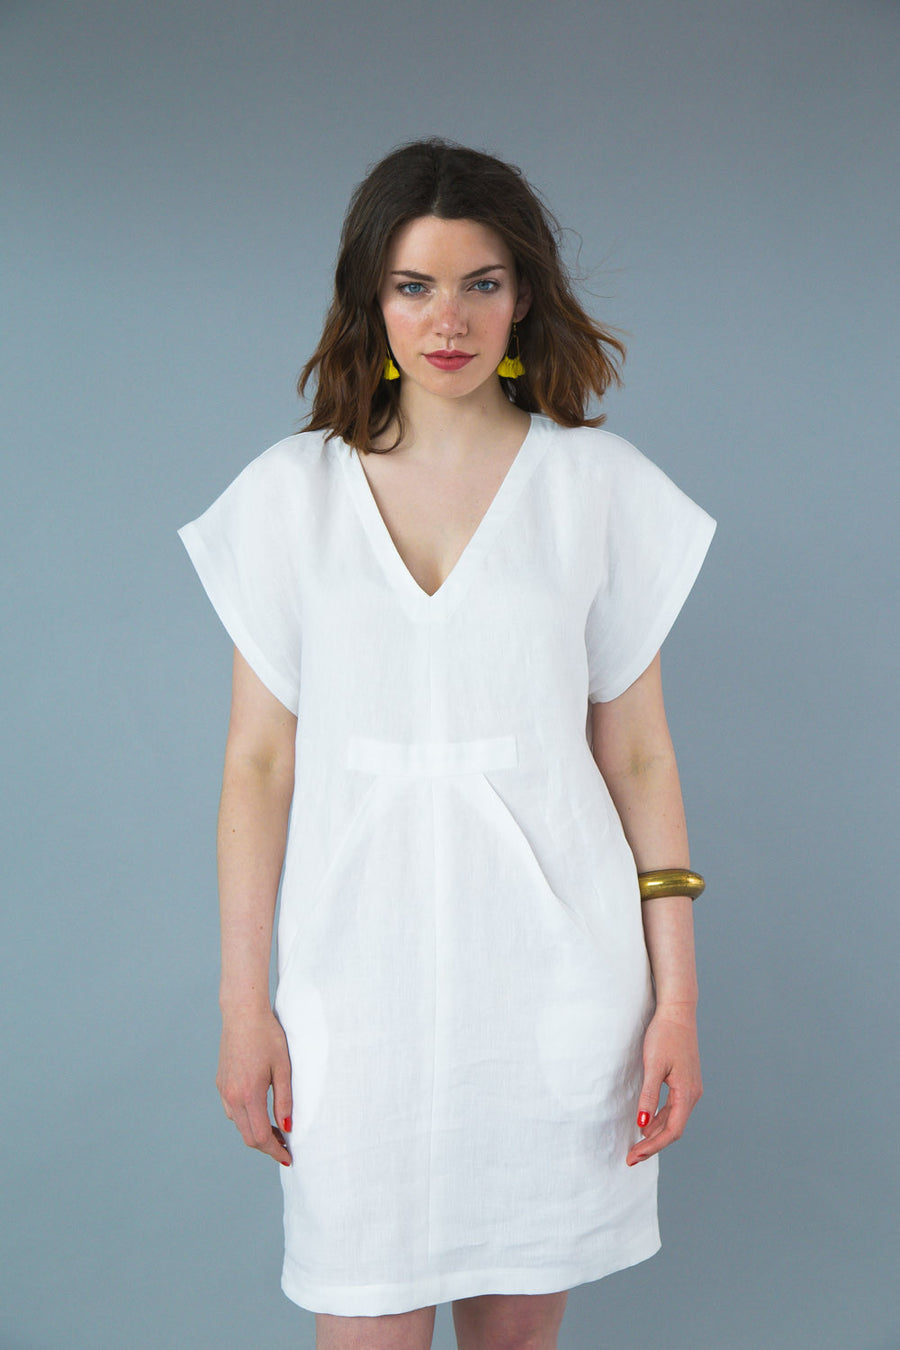 The 3 V-Neck Dresses You Should Have in Your Closet - The Girl from Panama